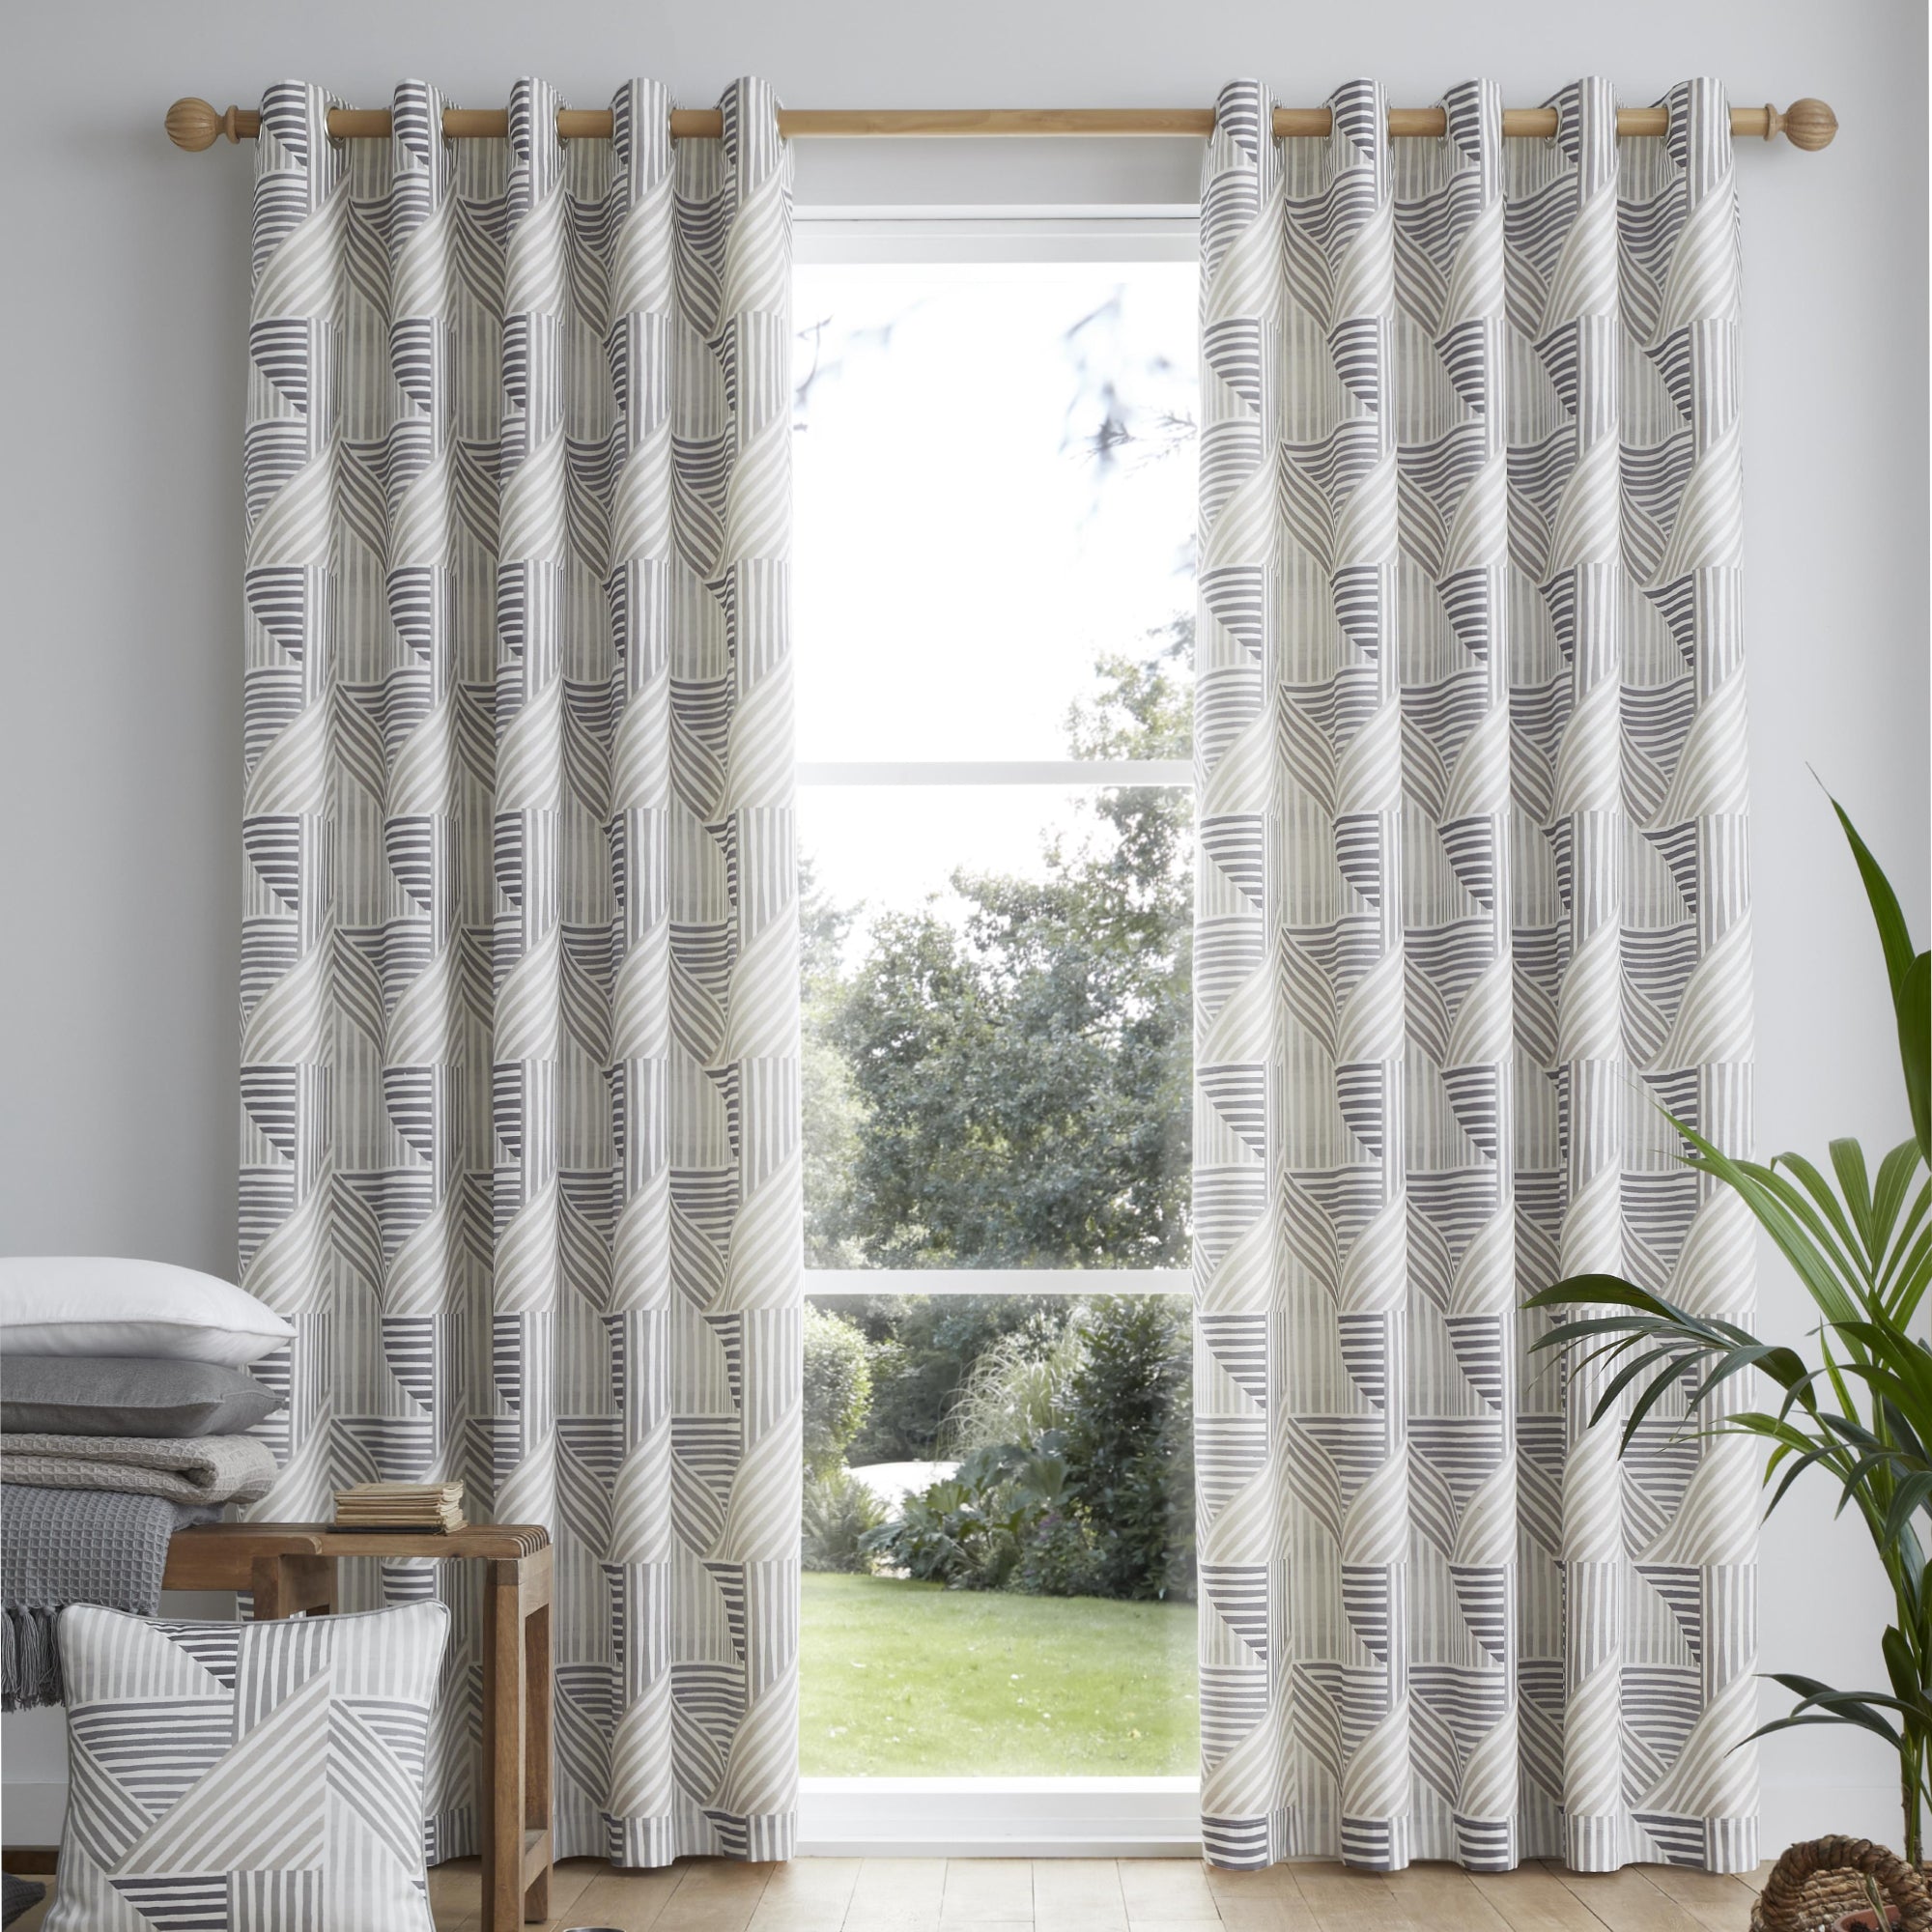 Pair of Eyelet Curtains Campden by Fusion in Natural